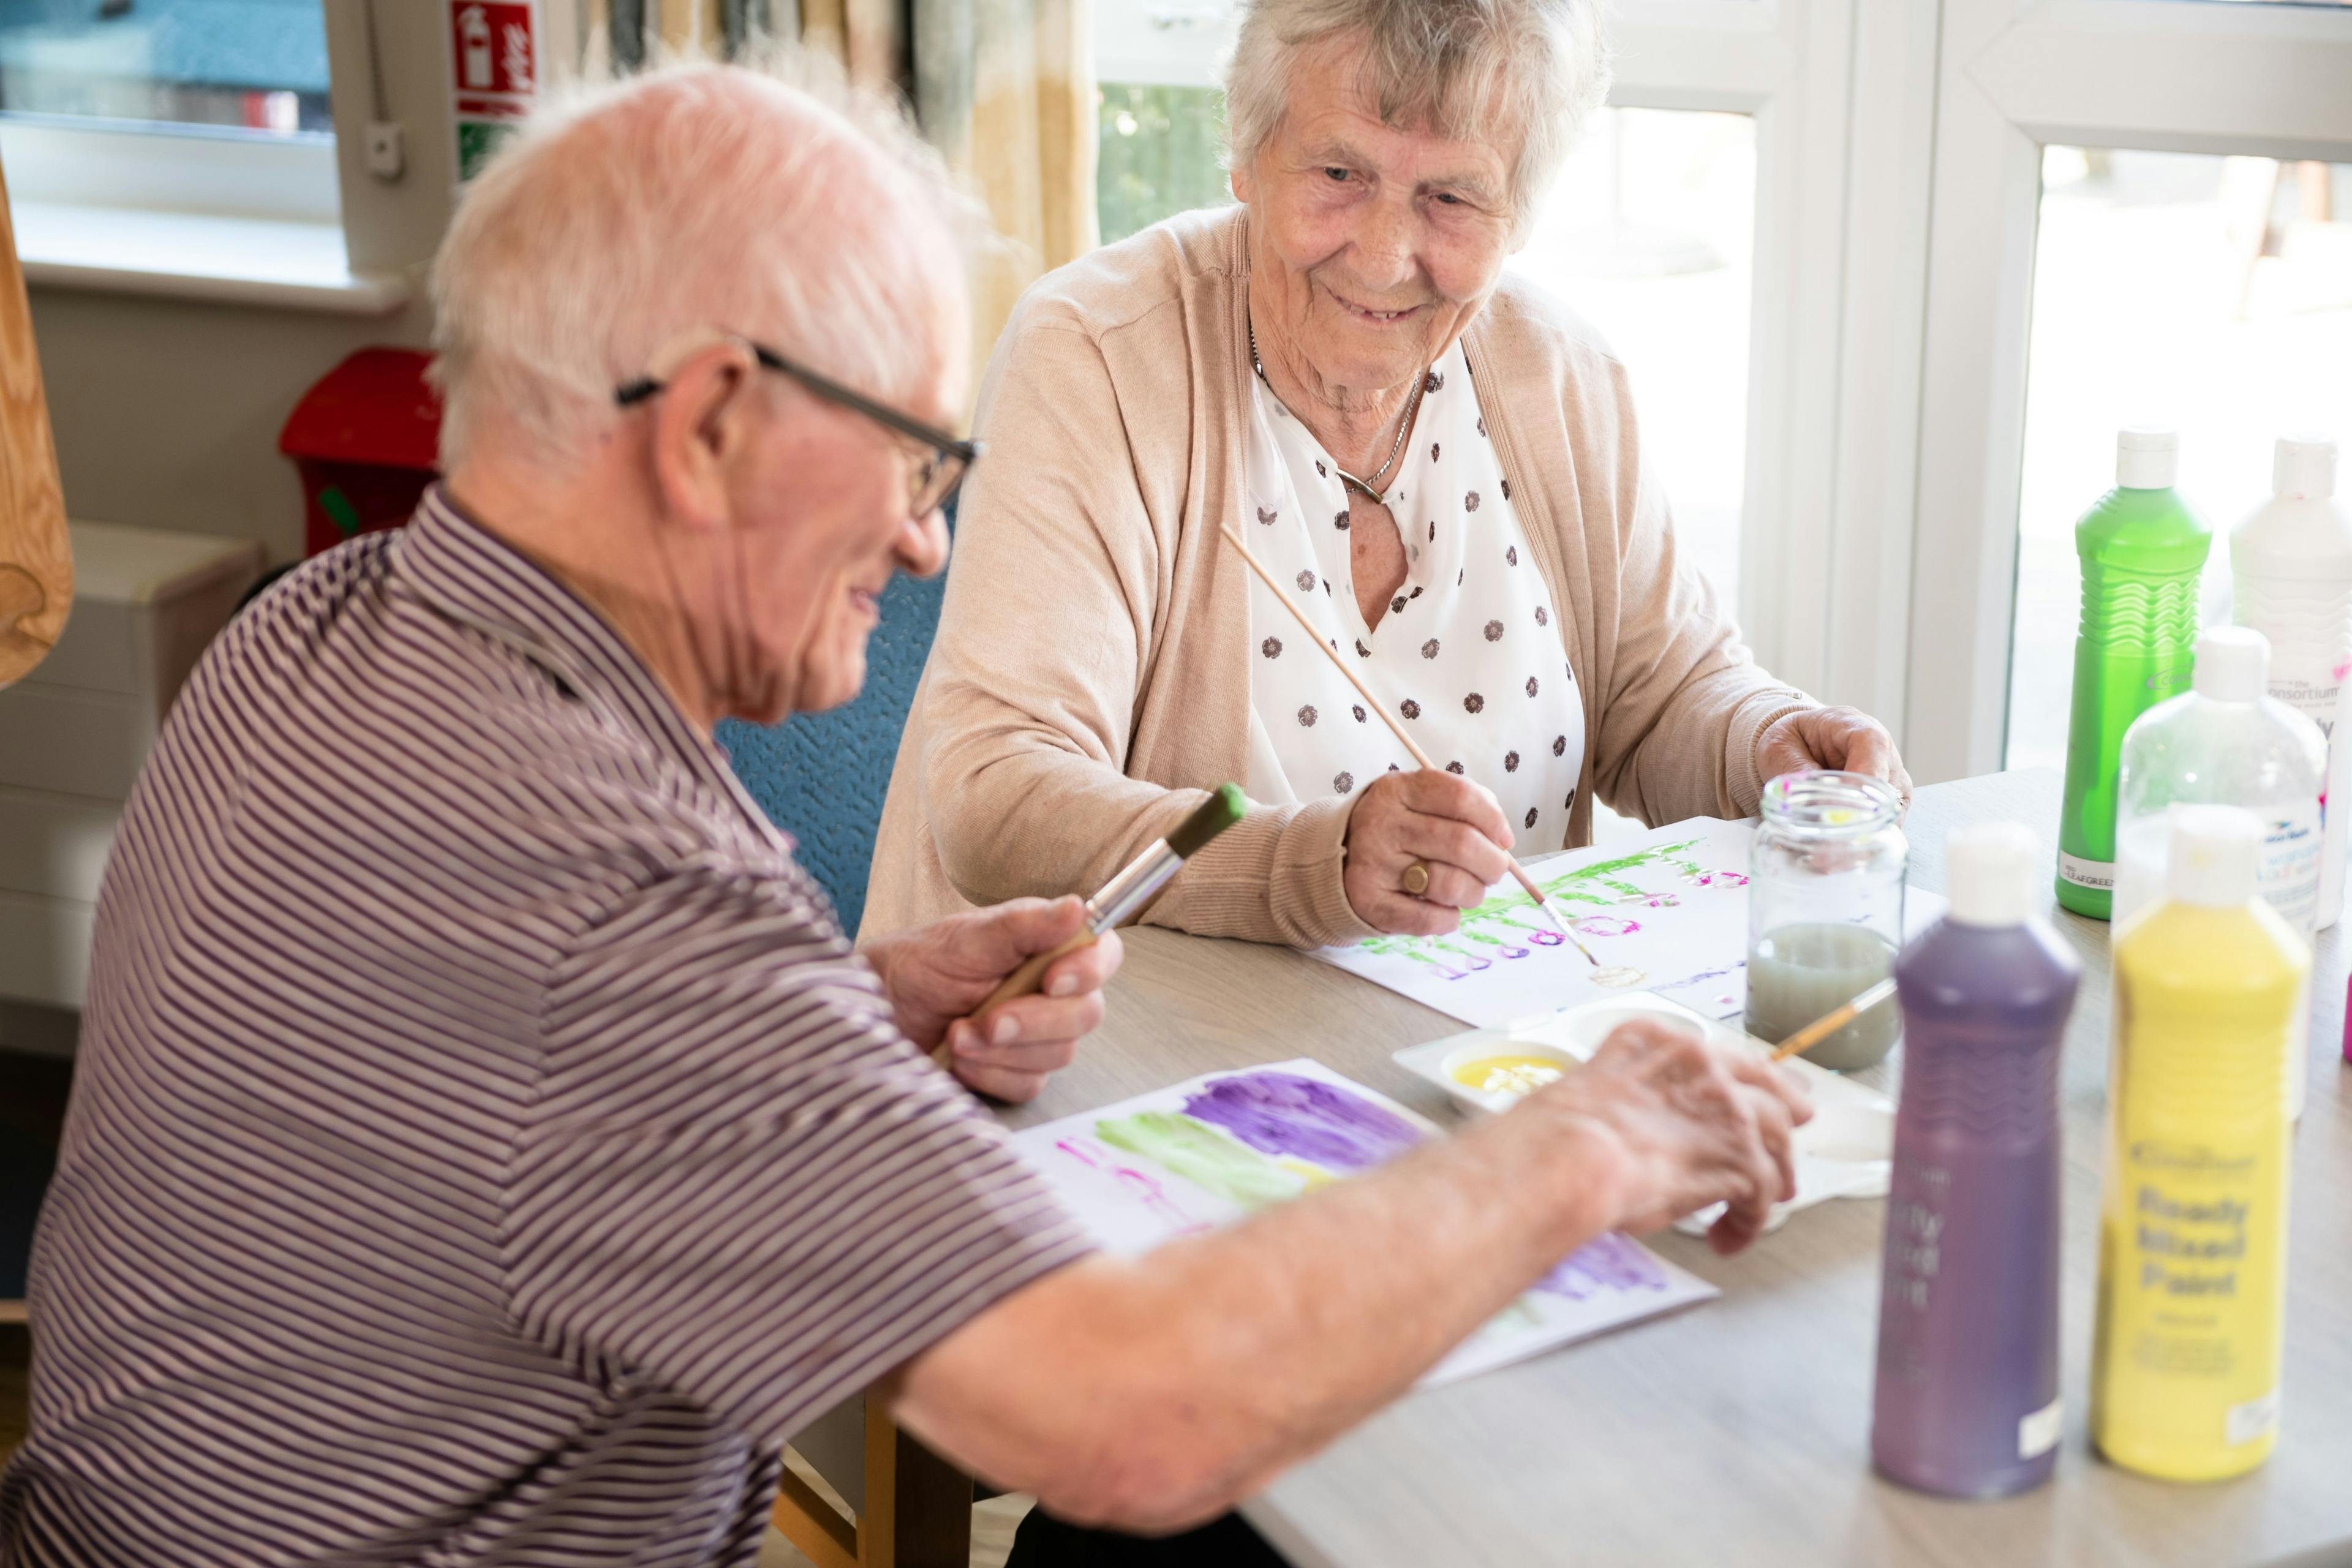 Activities at the Langdon House Care Home in Cambridge, Cambridgeshire